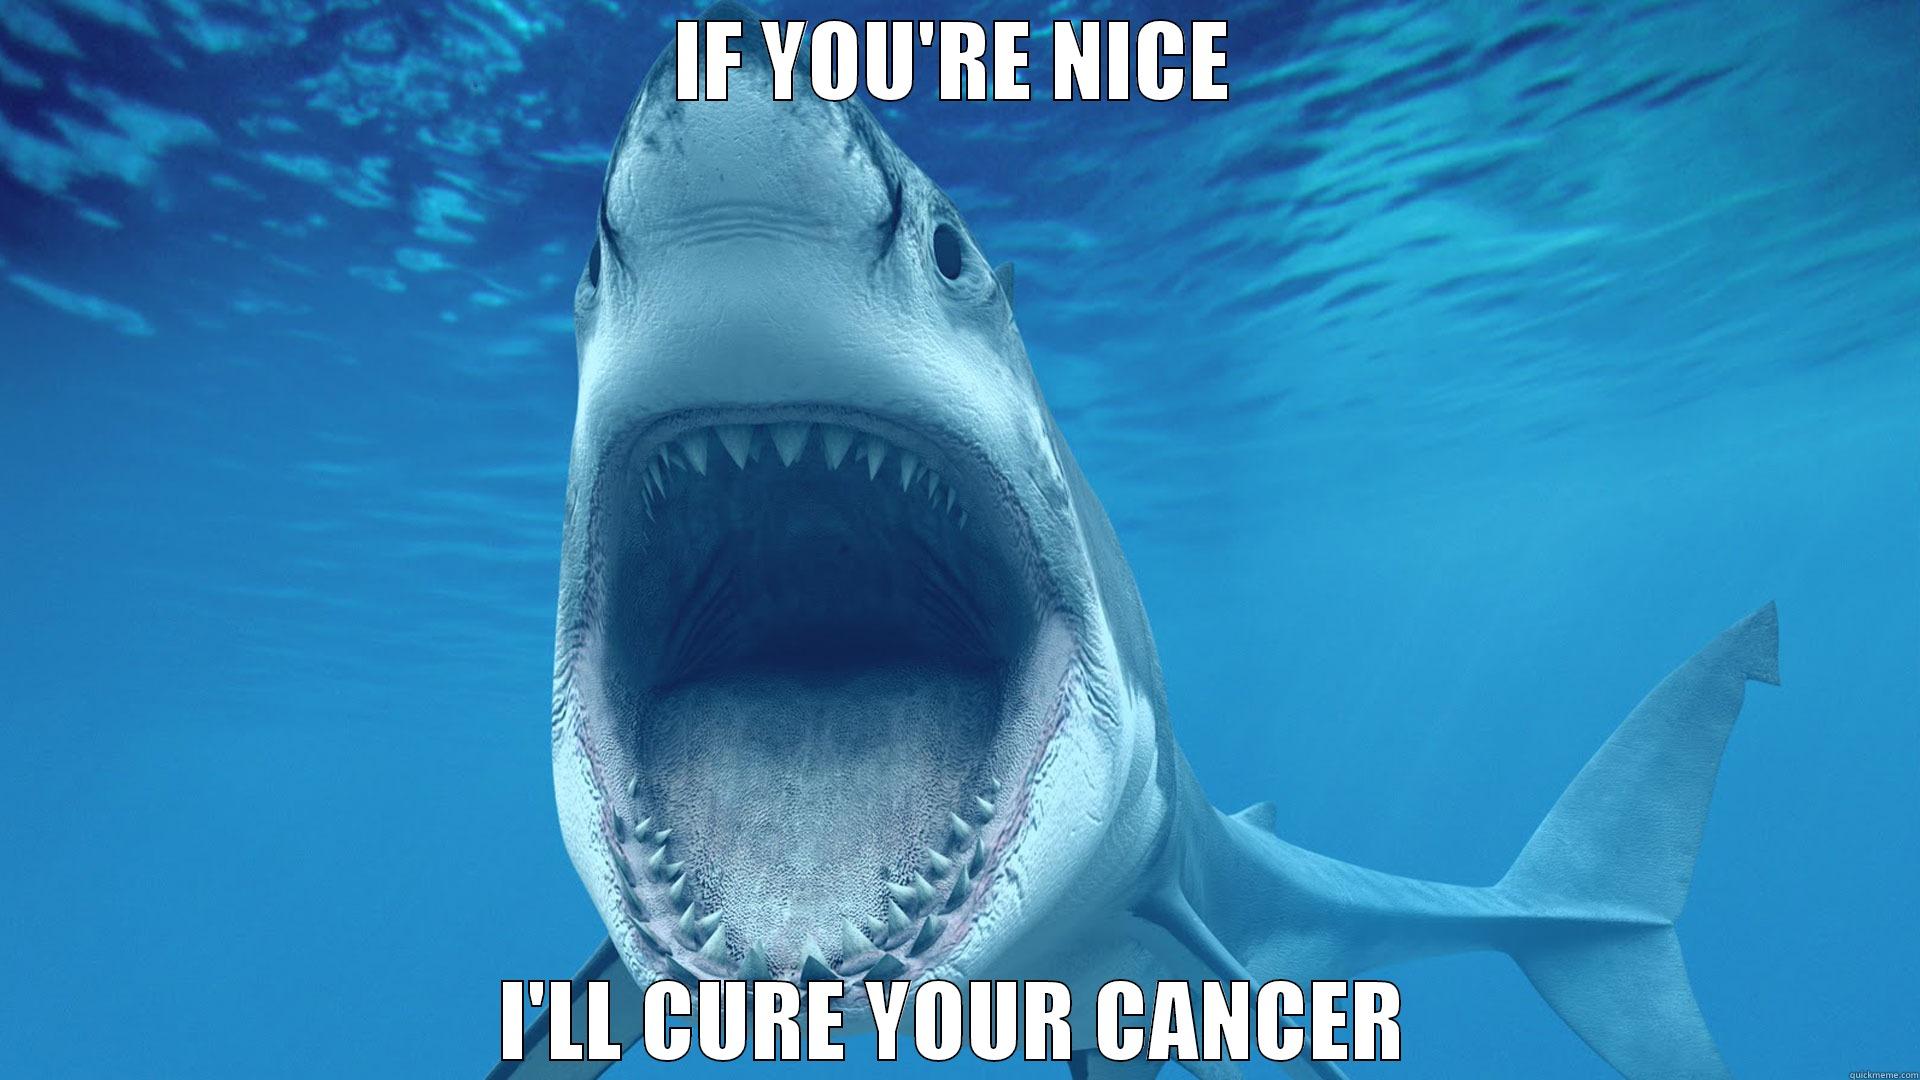 Shark anti cancer - IF YOU'RE NICE I'LL CURE YOUR CANCER Misc